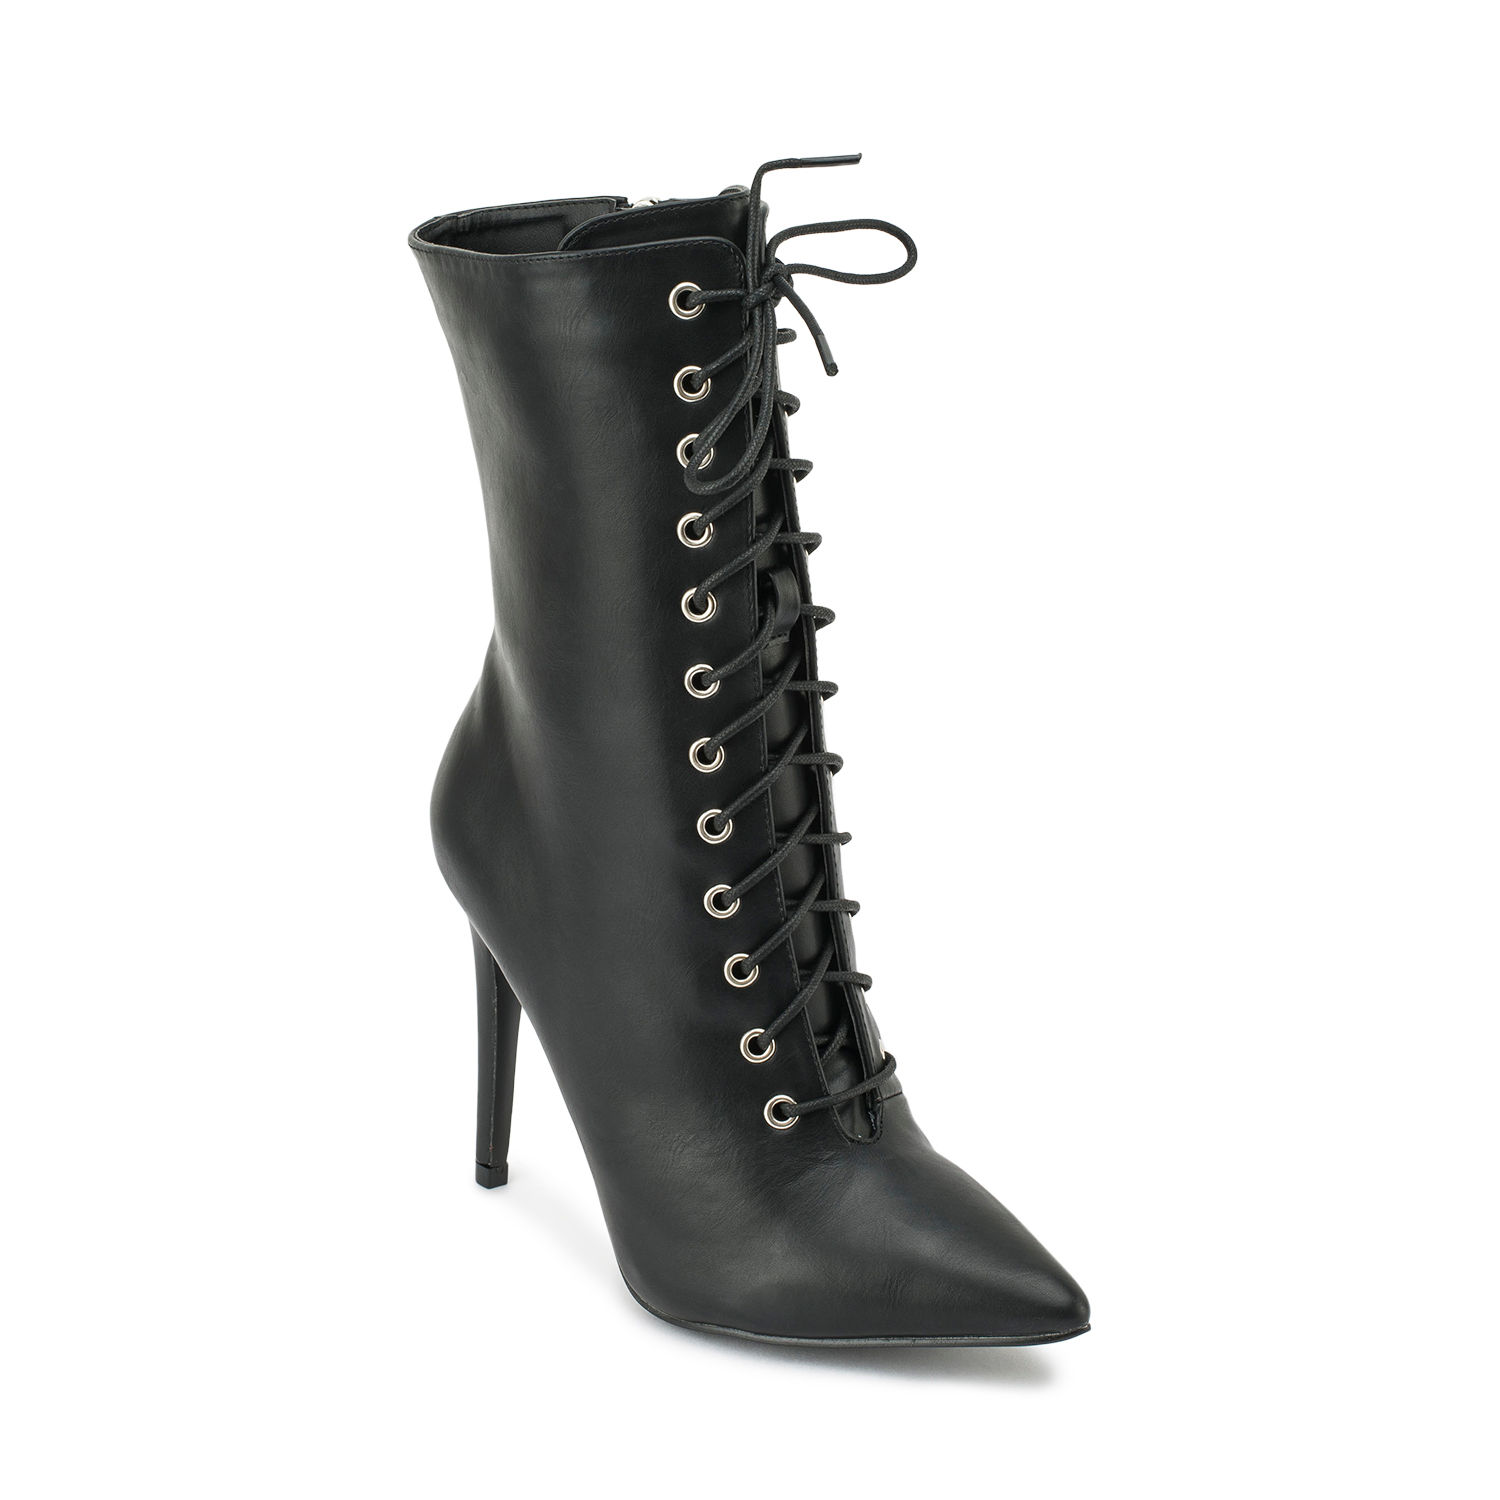 Truffle Collection glam over the knee stiletto boots in black